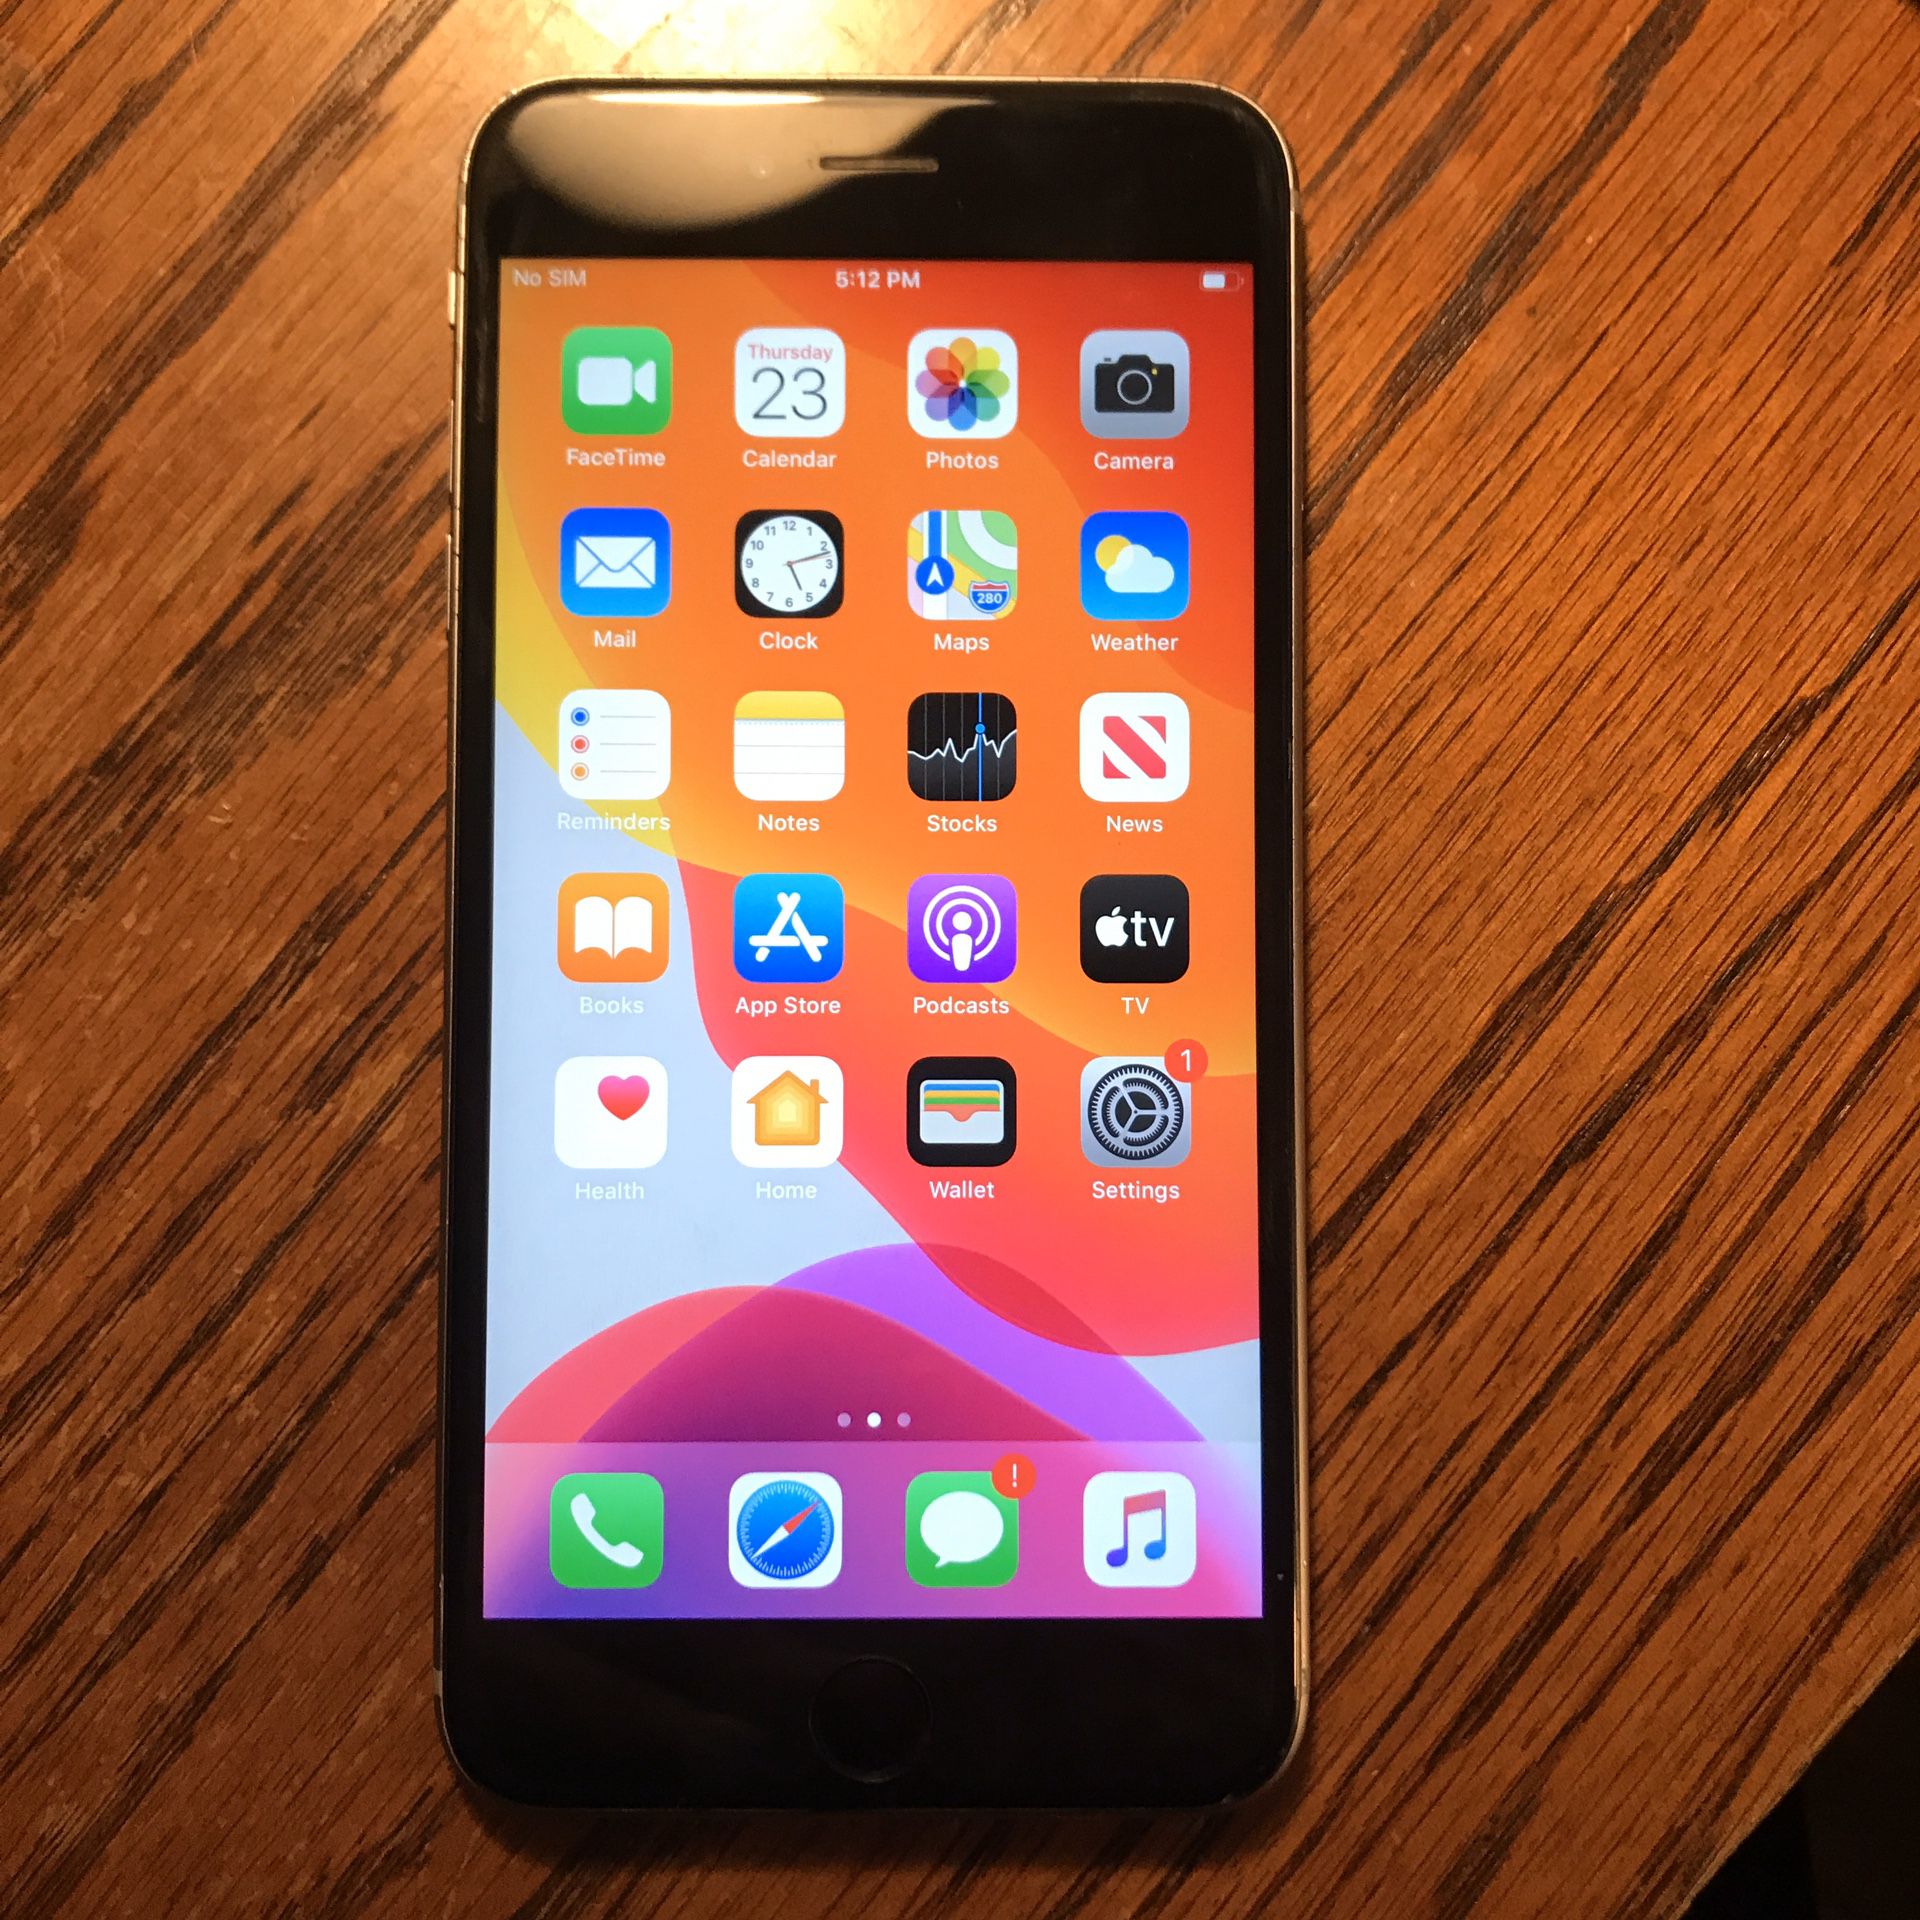 iPhone 6s Plus 32GB unlocked any carrier clean IMEI iCloud cleared